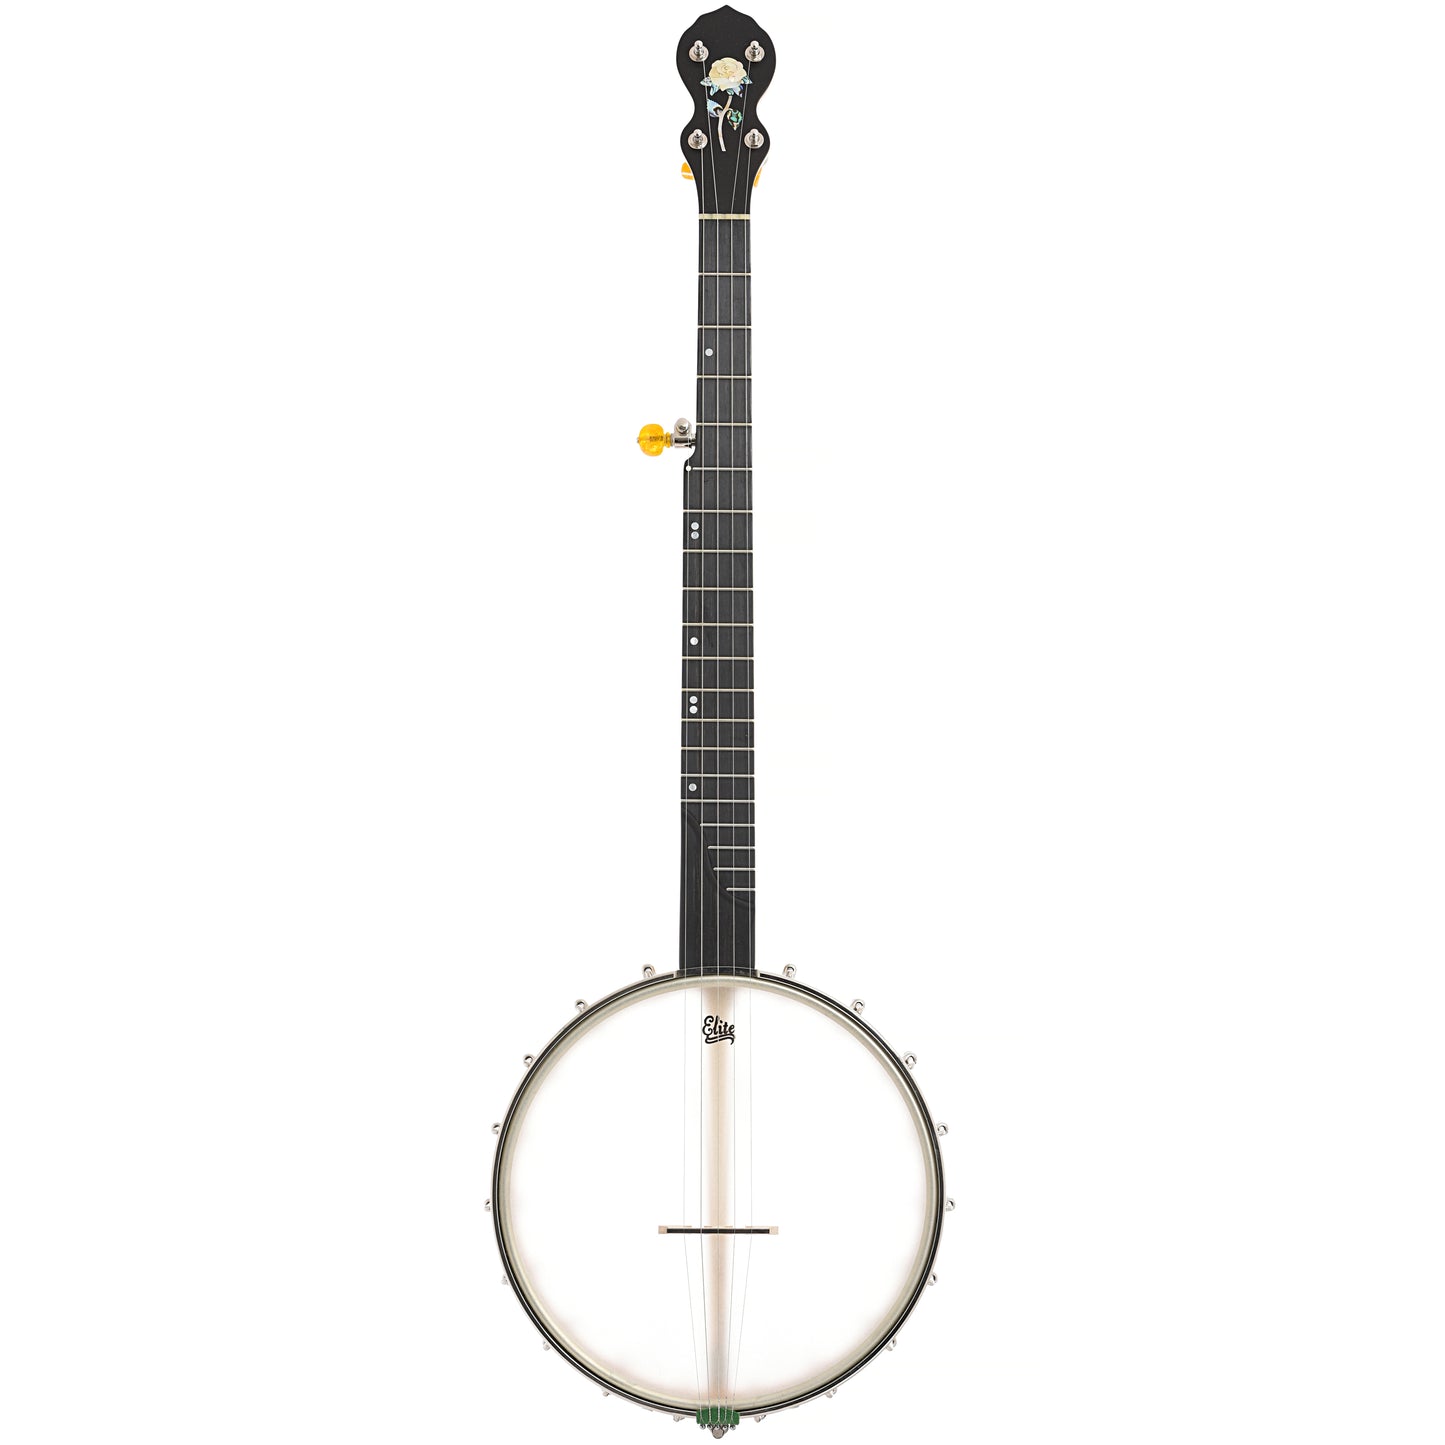 Full front of Chuck Lee Glen Rose #858 Openback Banjo, Electric (Whyte Laydie) Tone Ring, 11" Rim